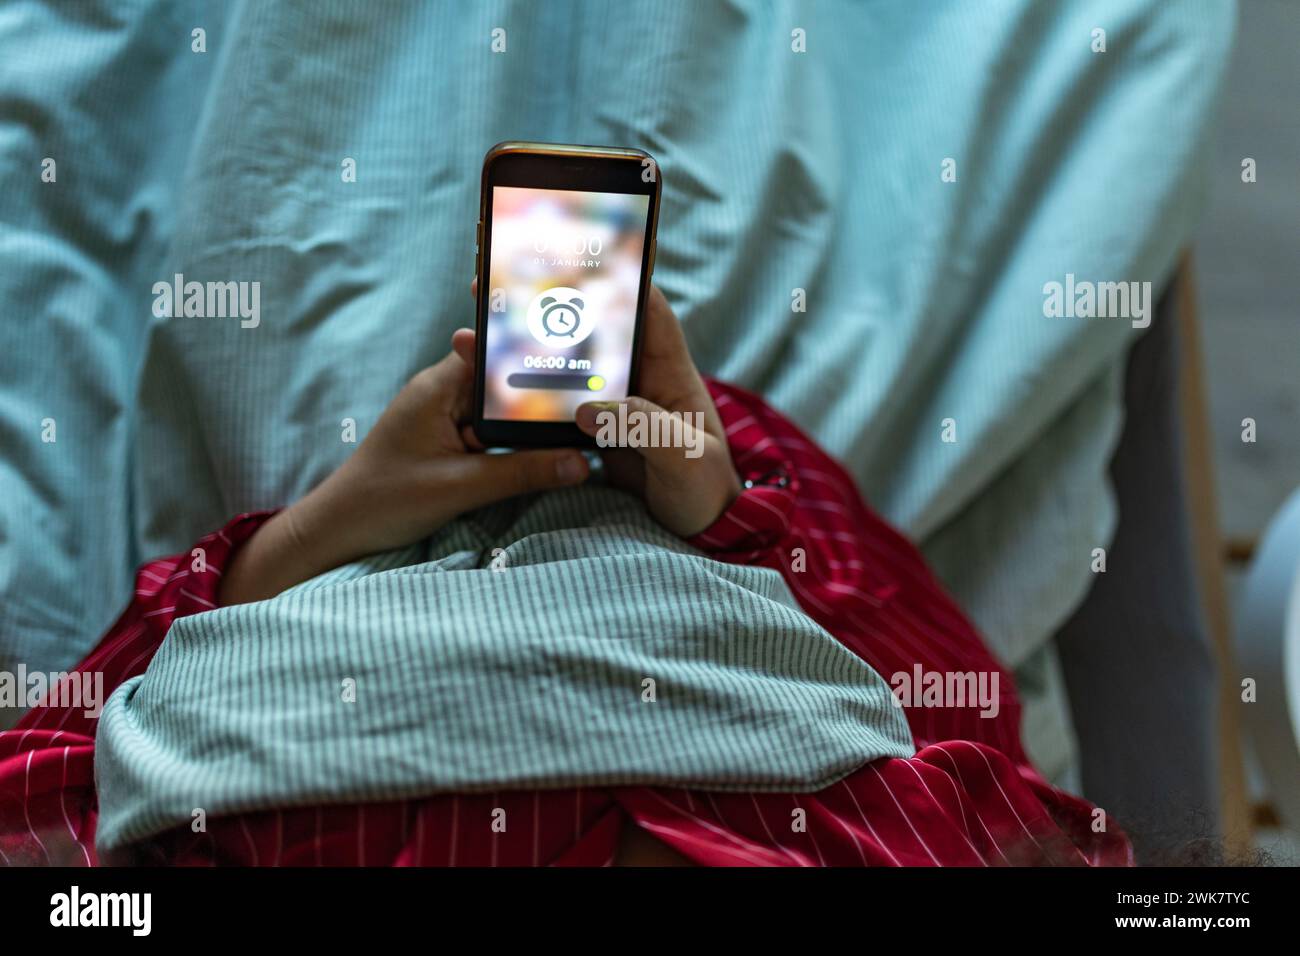 Woman setting alarm before going to sleep. Concept of sleep routine. Insomnia a sleep problems among adults. Stock Photo